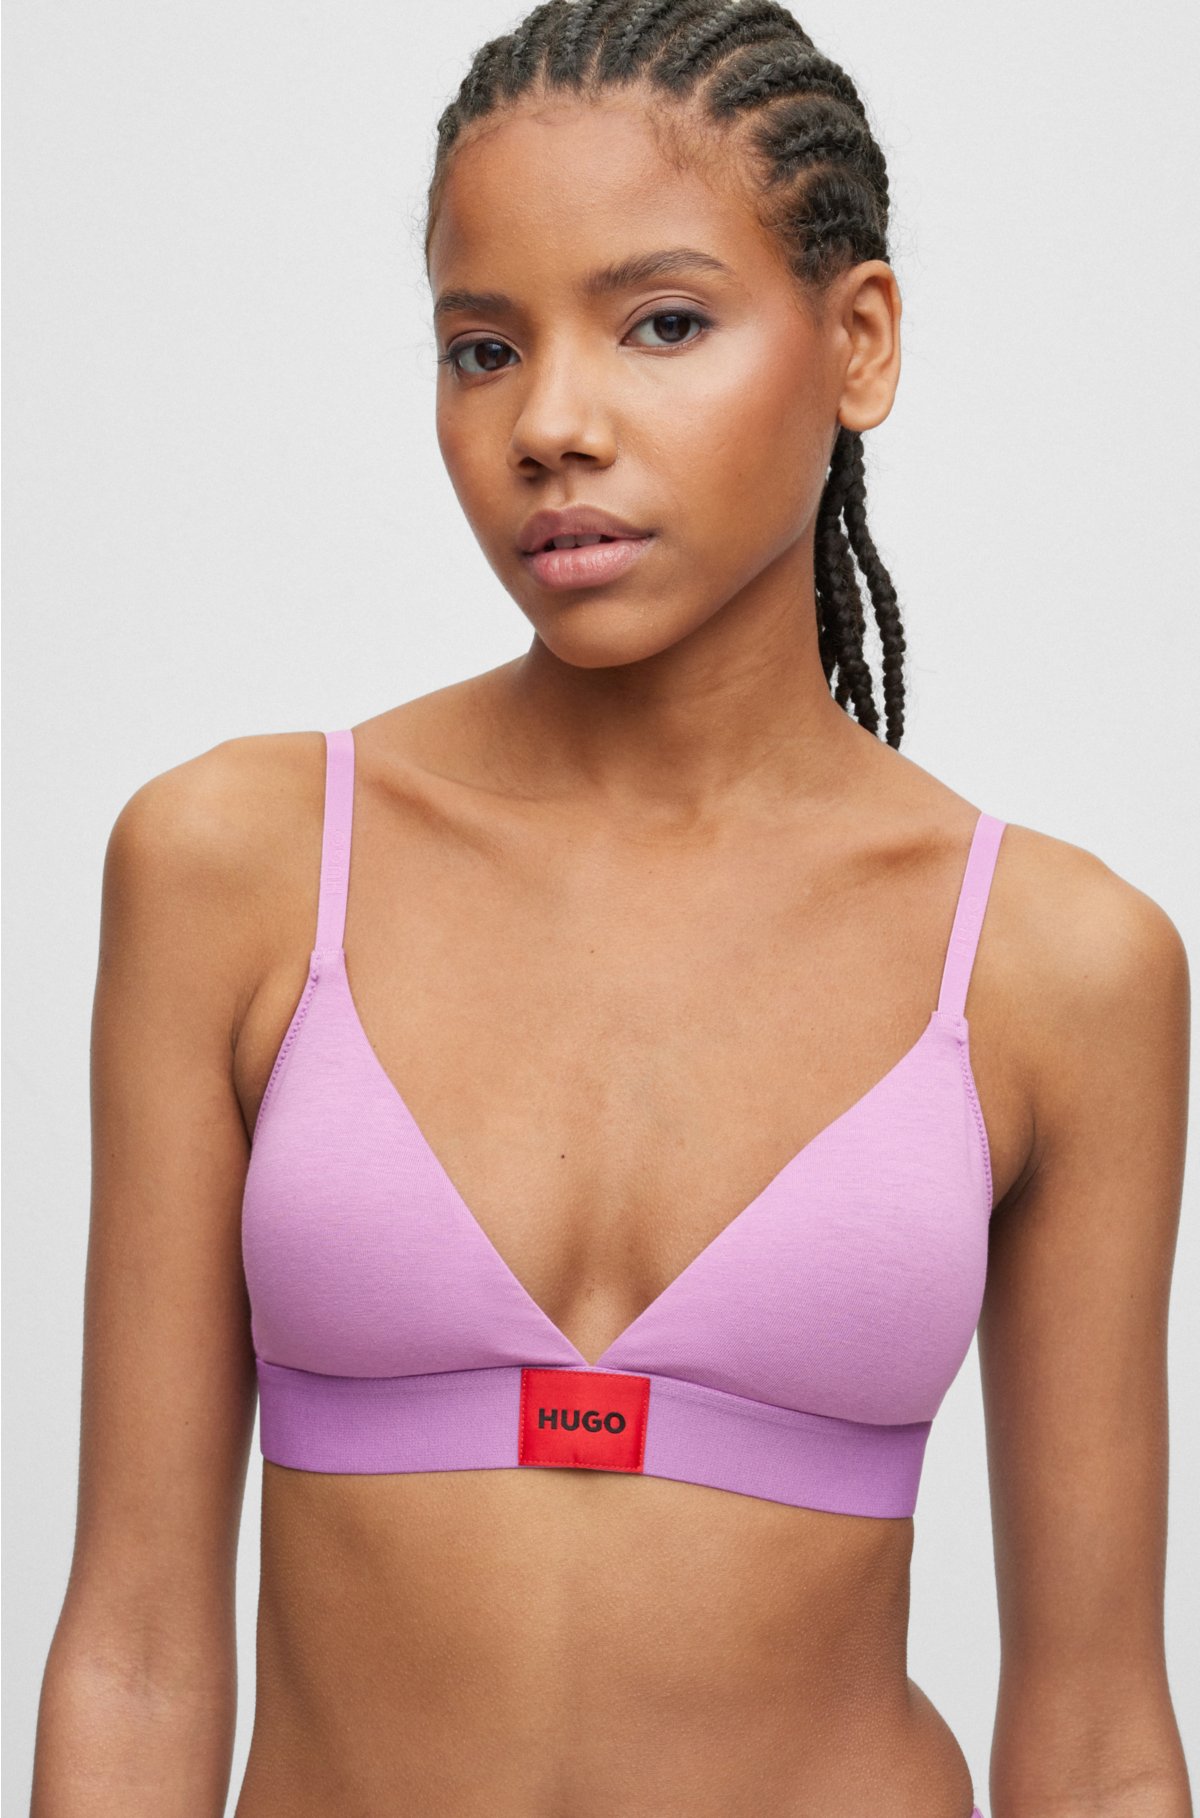 HUGO - Two-pack of bralettes in stretch modal